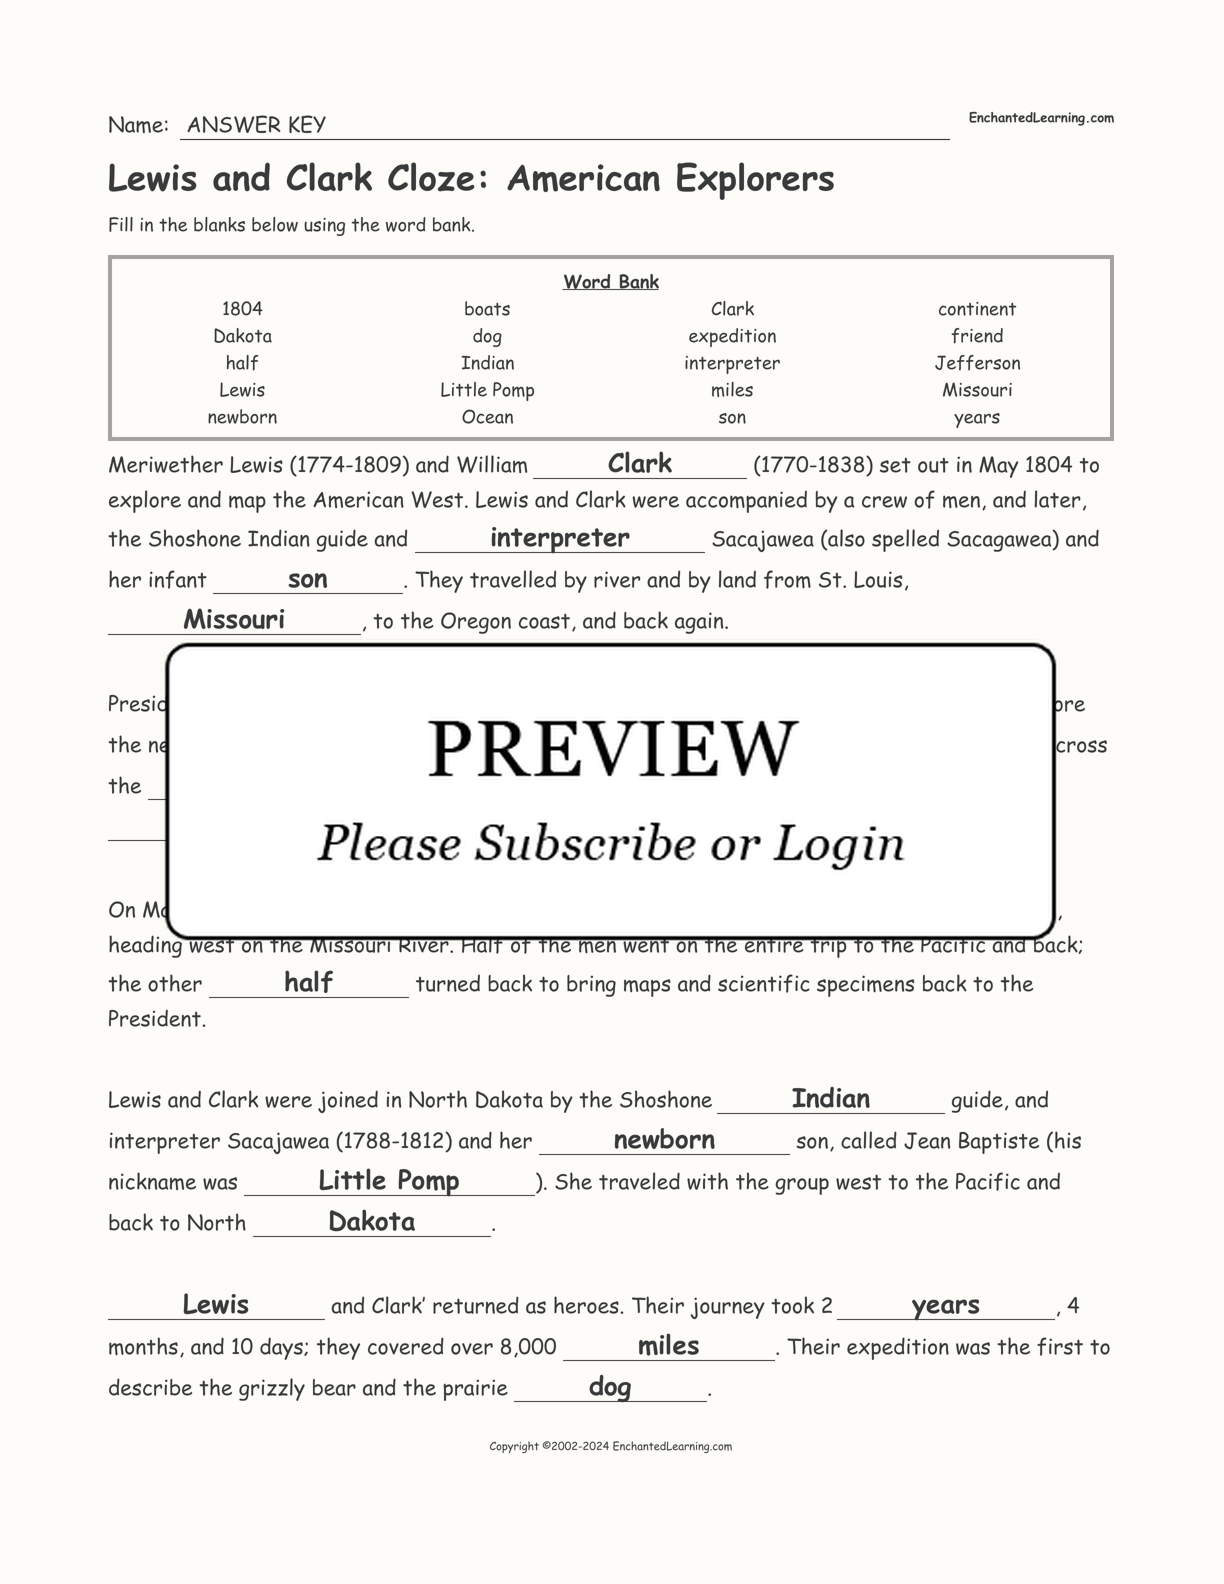 Lewis and Clark Cloze: American Explorers interactive worksheet page 2